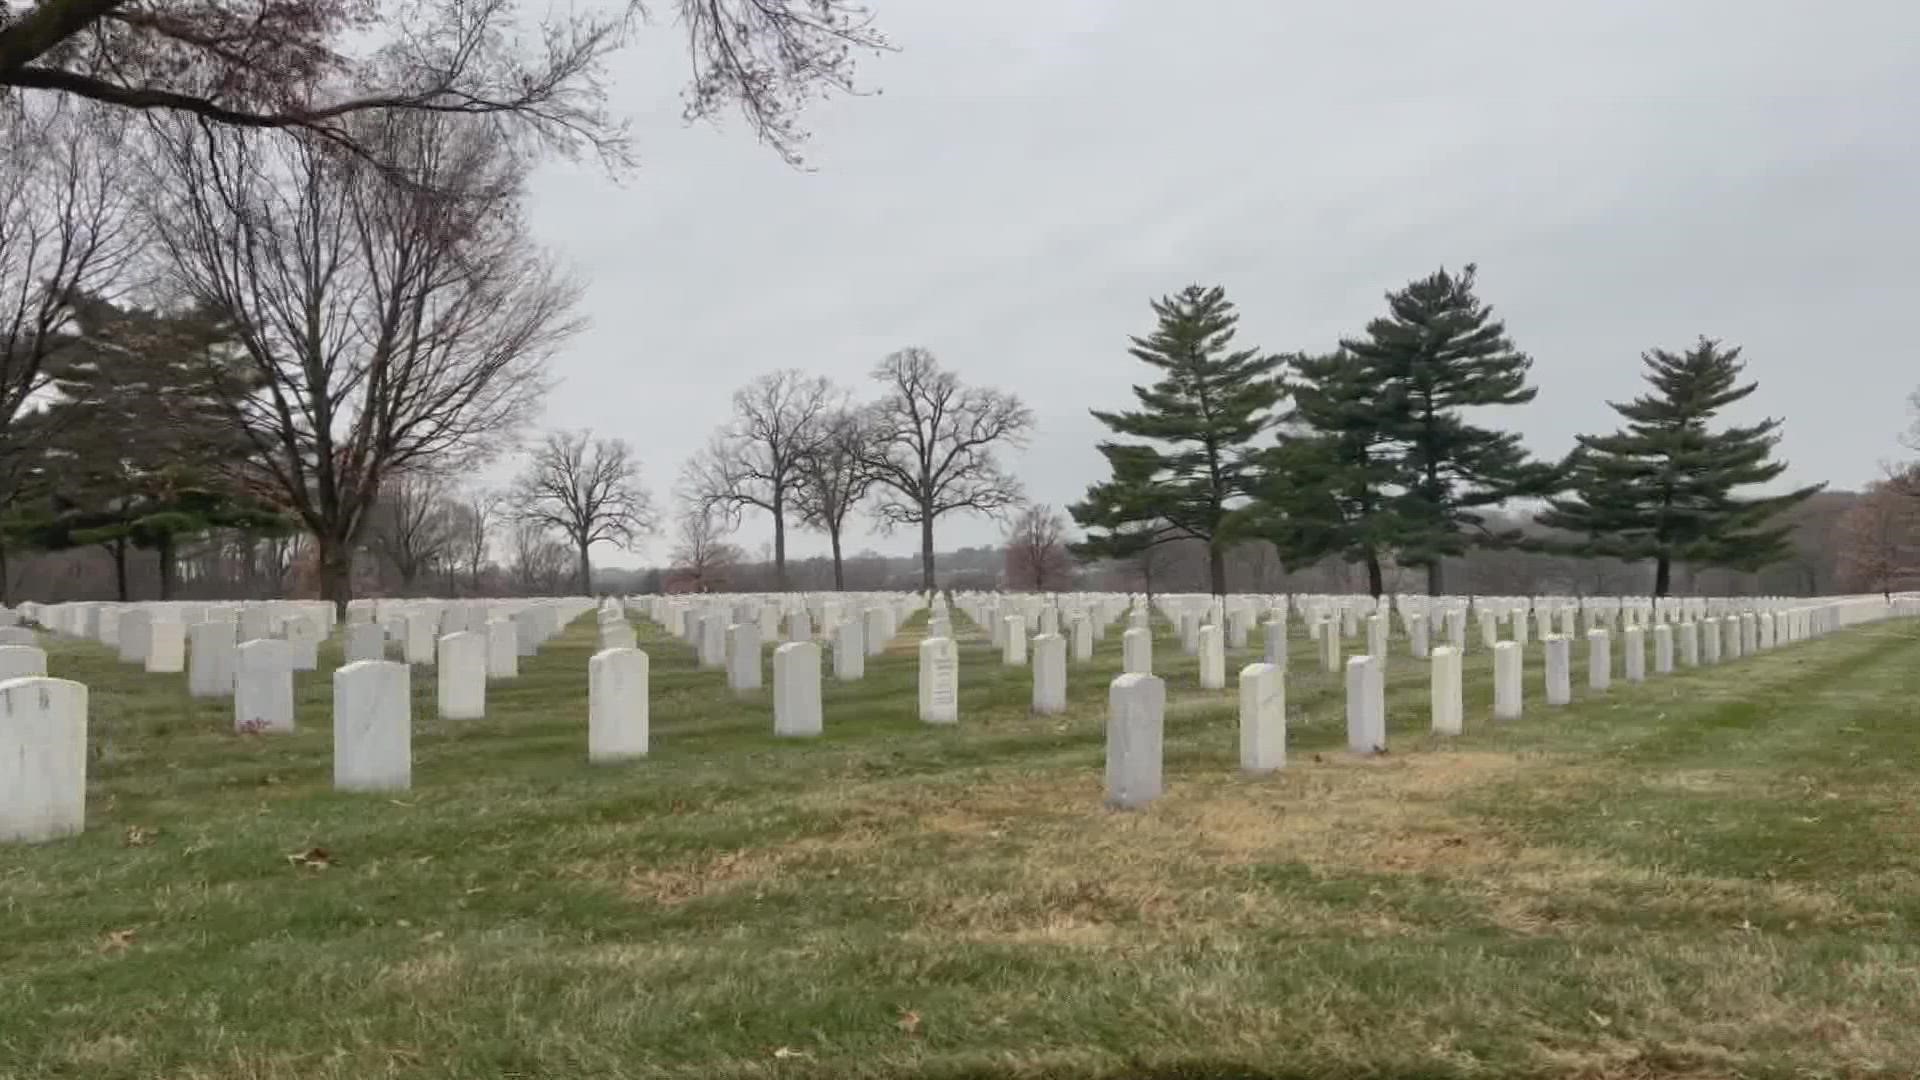 Local organizers are raising awareness about a push to lay remembrance wreaths at the headstones to honor fallen American soldiers at military cemeteries.